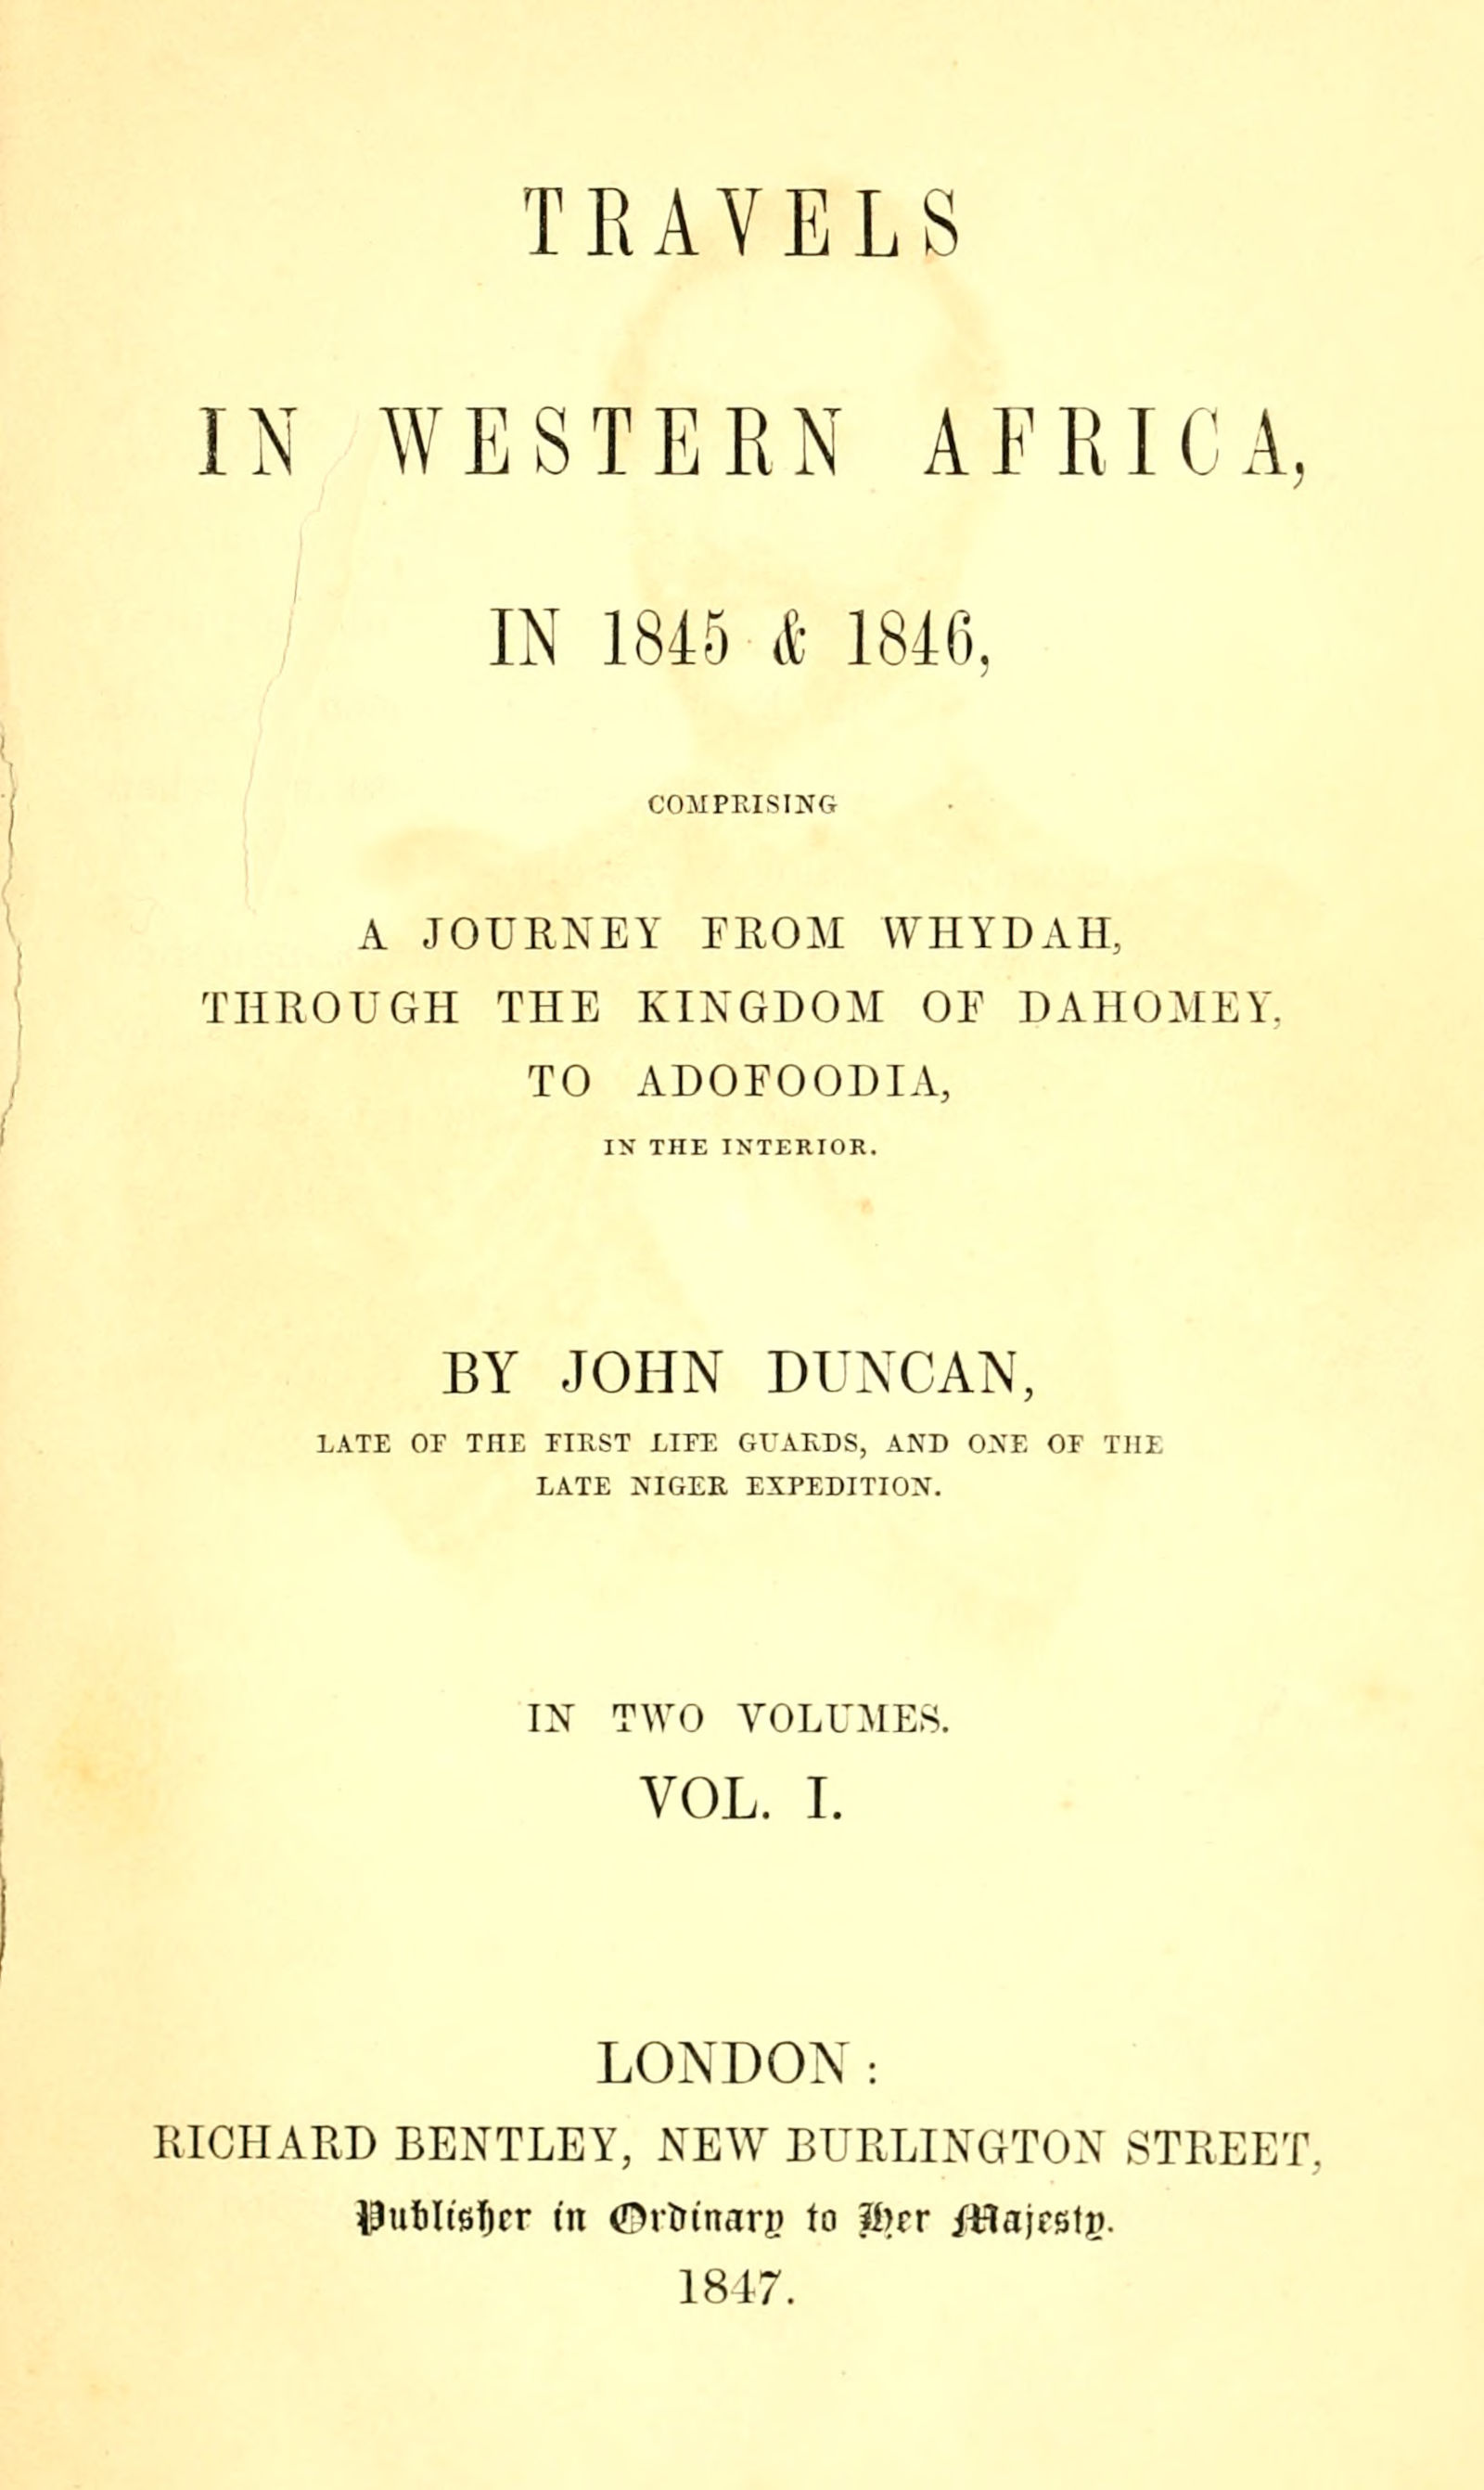 Travels in Western Africa in 1845 & 1846, Volume 1 (of 2)&#10;comprising a journey from Whydah through the Kingdom of Dahomey to Adofoodia in the interior